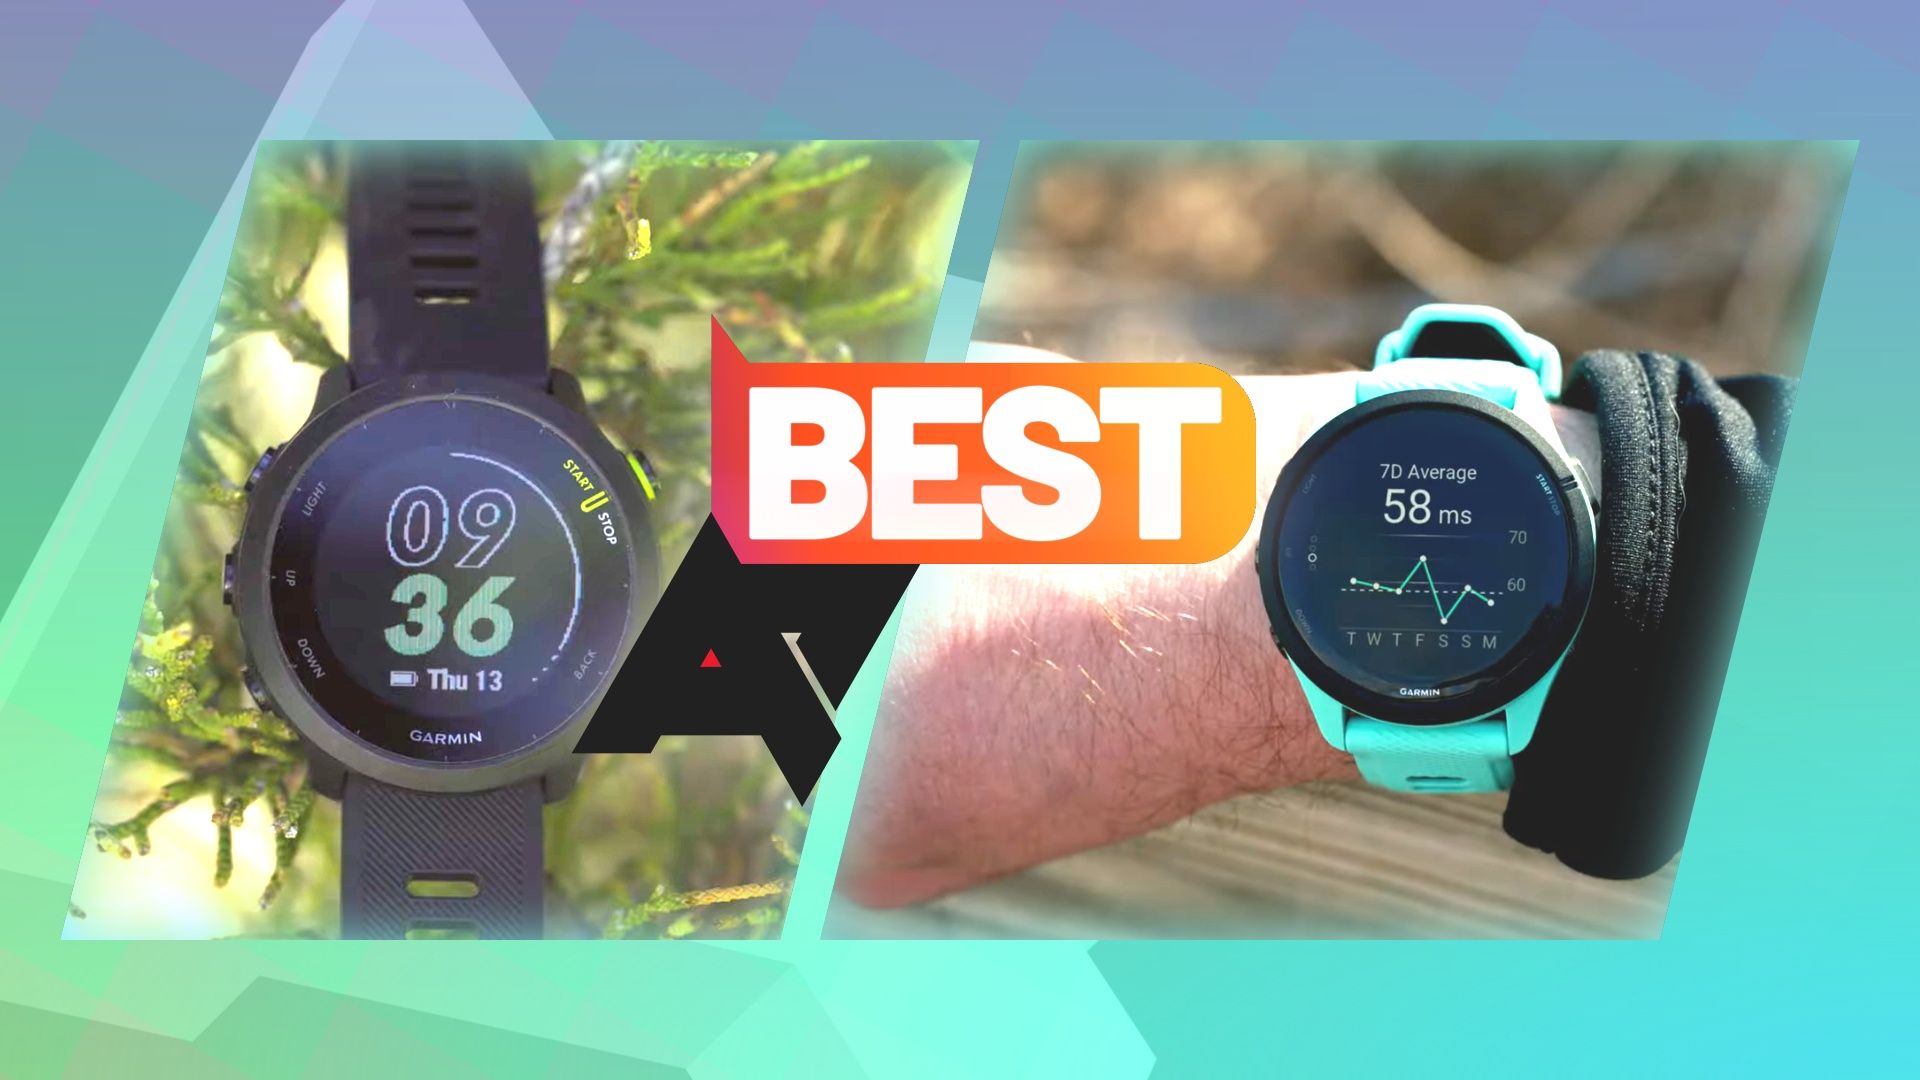 The best multisport smartwatches: Garmin and more - Android Authority